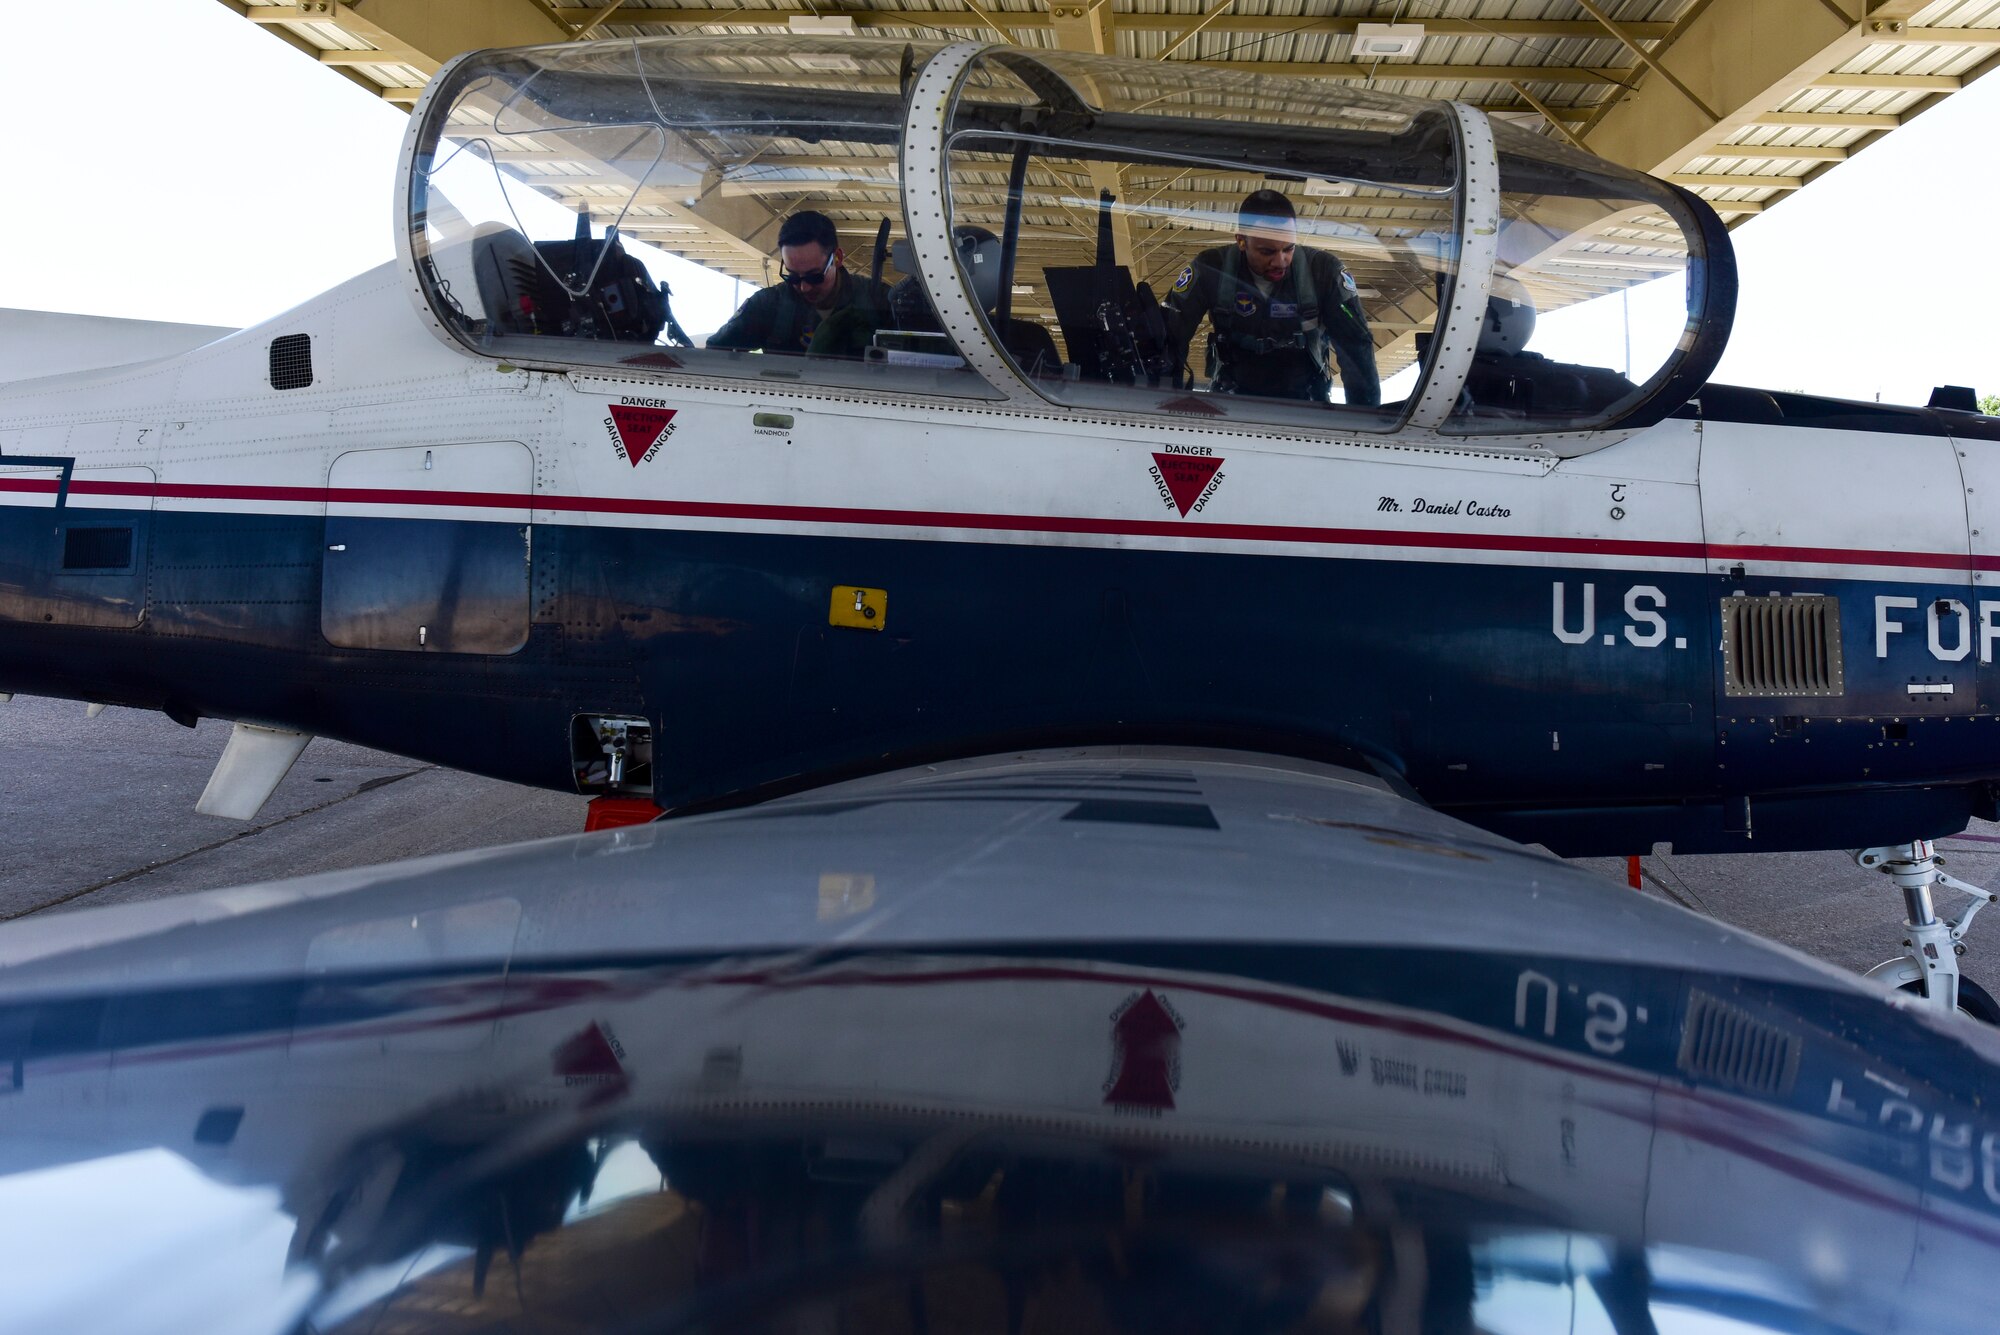 Capt. Joshua White, 434th Flying Training Squadron X flight commander and instructor pilot, and 2nd Lt. Roderick Byars, 47 Student Squadron student pilot, prepare a T-6A Texan II for flight, April 23, 2020 at Laughlin Air Force Base, Texas. The biggest impact White is seeing the Coronavirus take on students and instructors is the ever-changing schedule, which White says they are overcoming by staying flexible. (U.S. Air Force photo by Senior Airman Anne McCready)